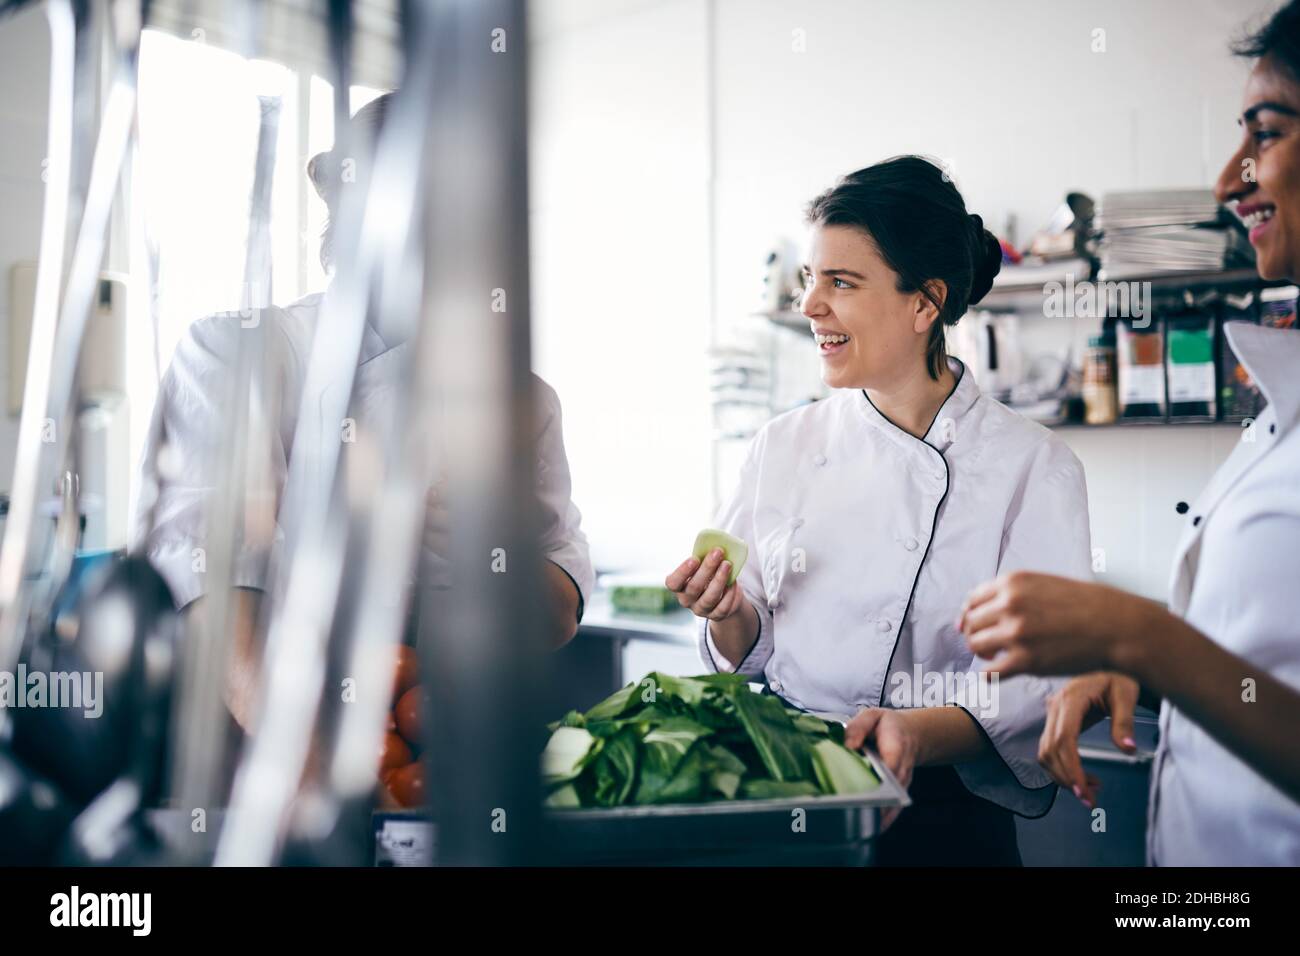 Male and female chefs discussing over leaf vegetable in commercial kitchen Stock Photo